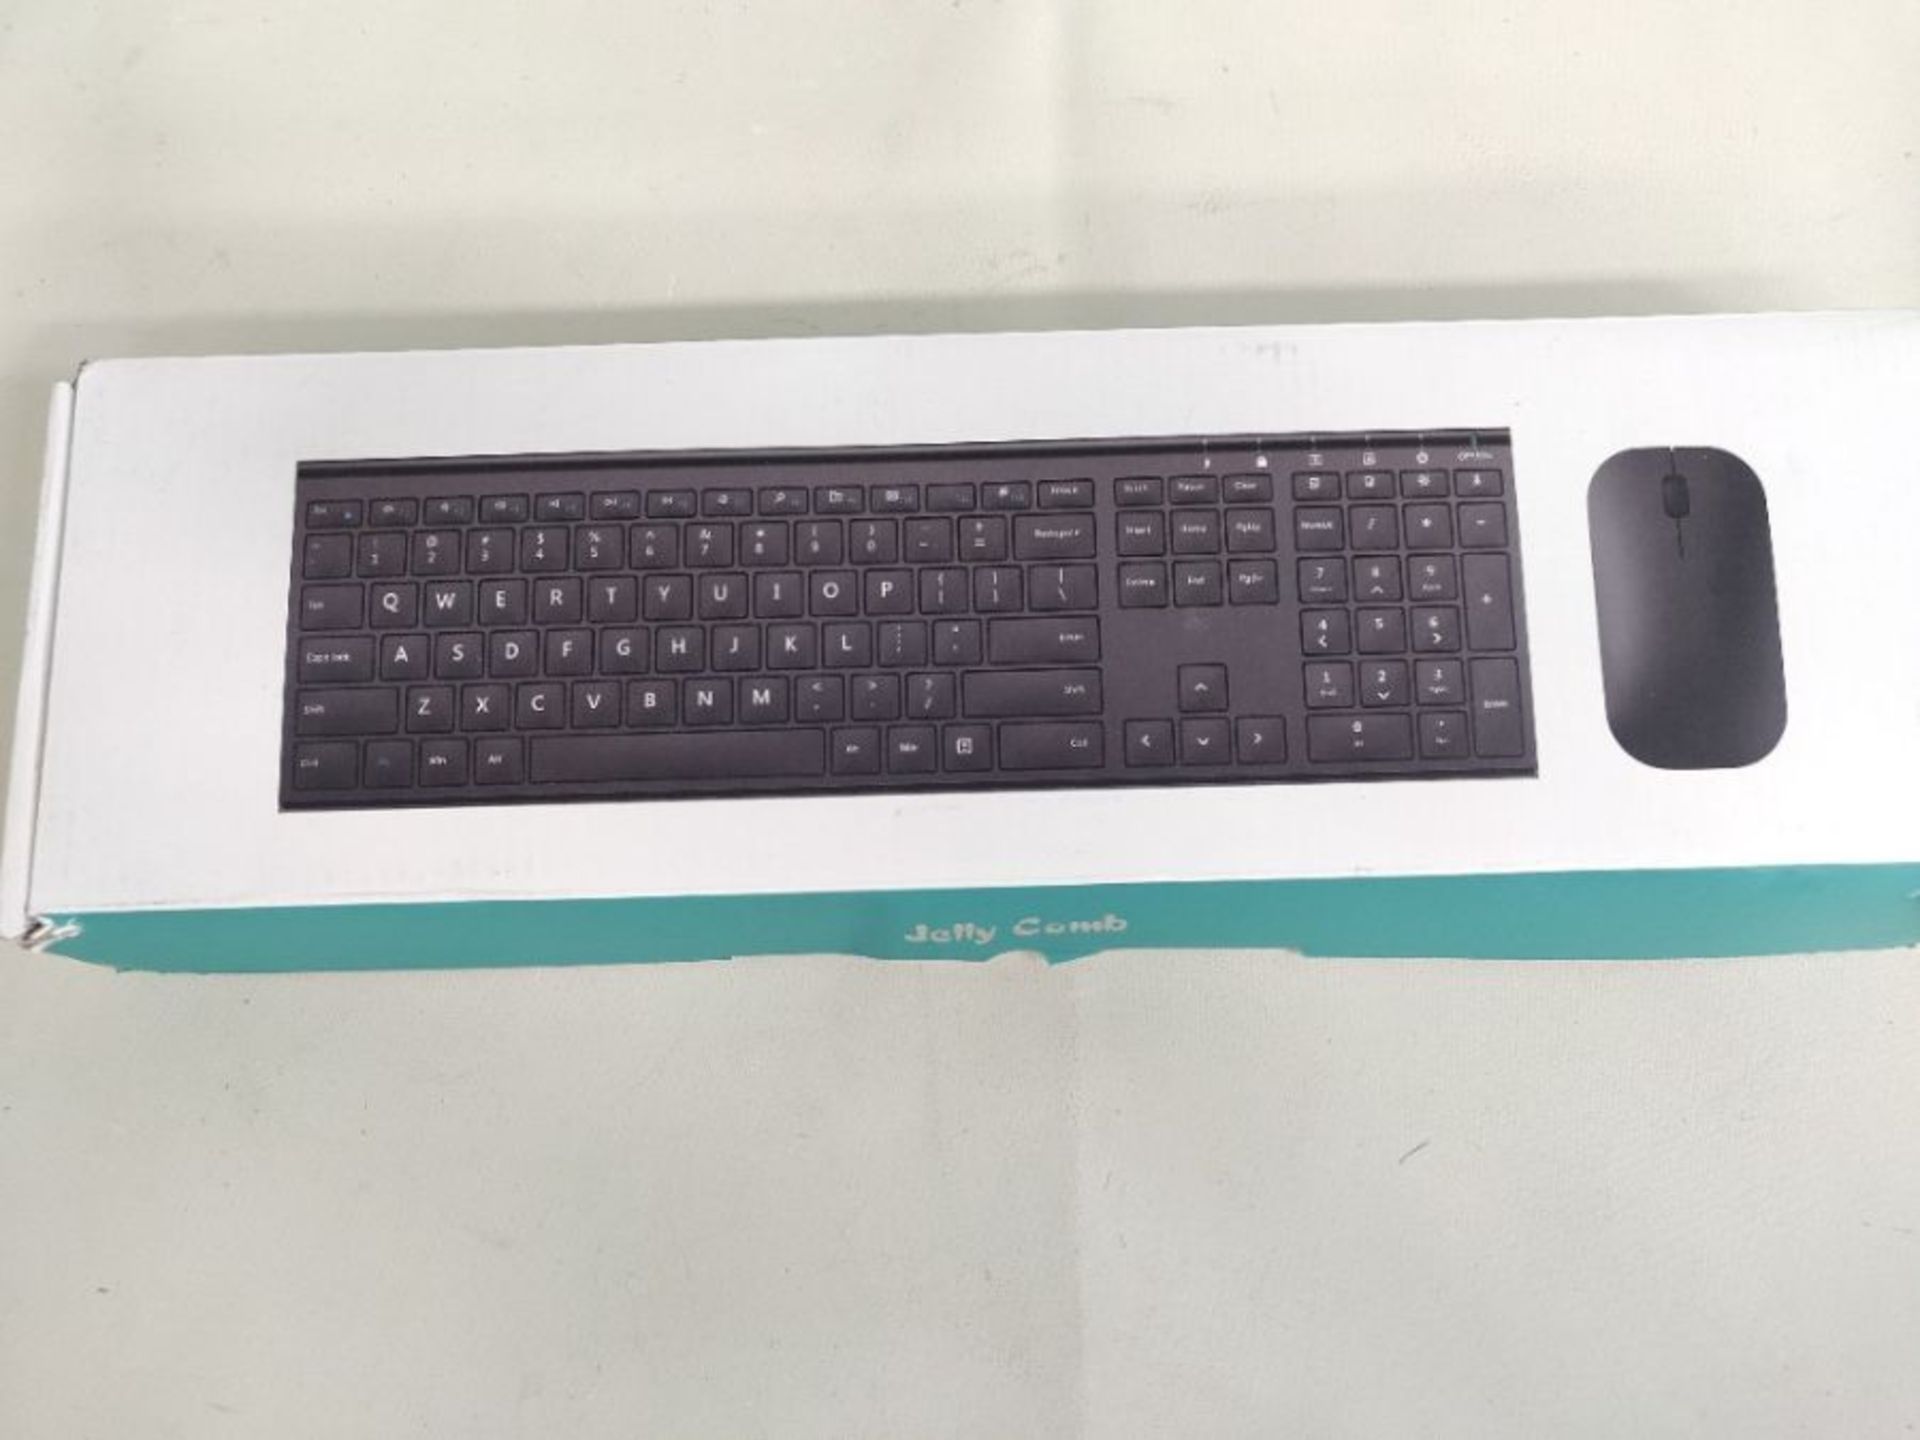 Wireless Rechargeable Keyboard Mouse, Jelly Comb KUS015F 2.4G Full Size Ultra Slim Key